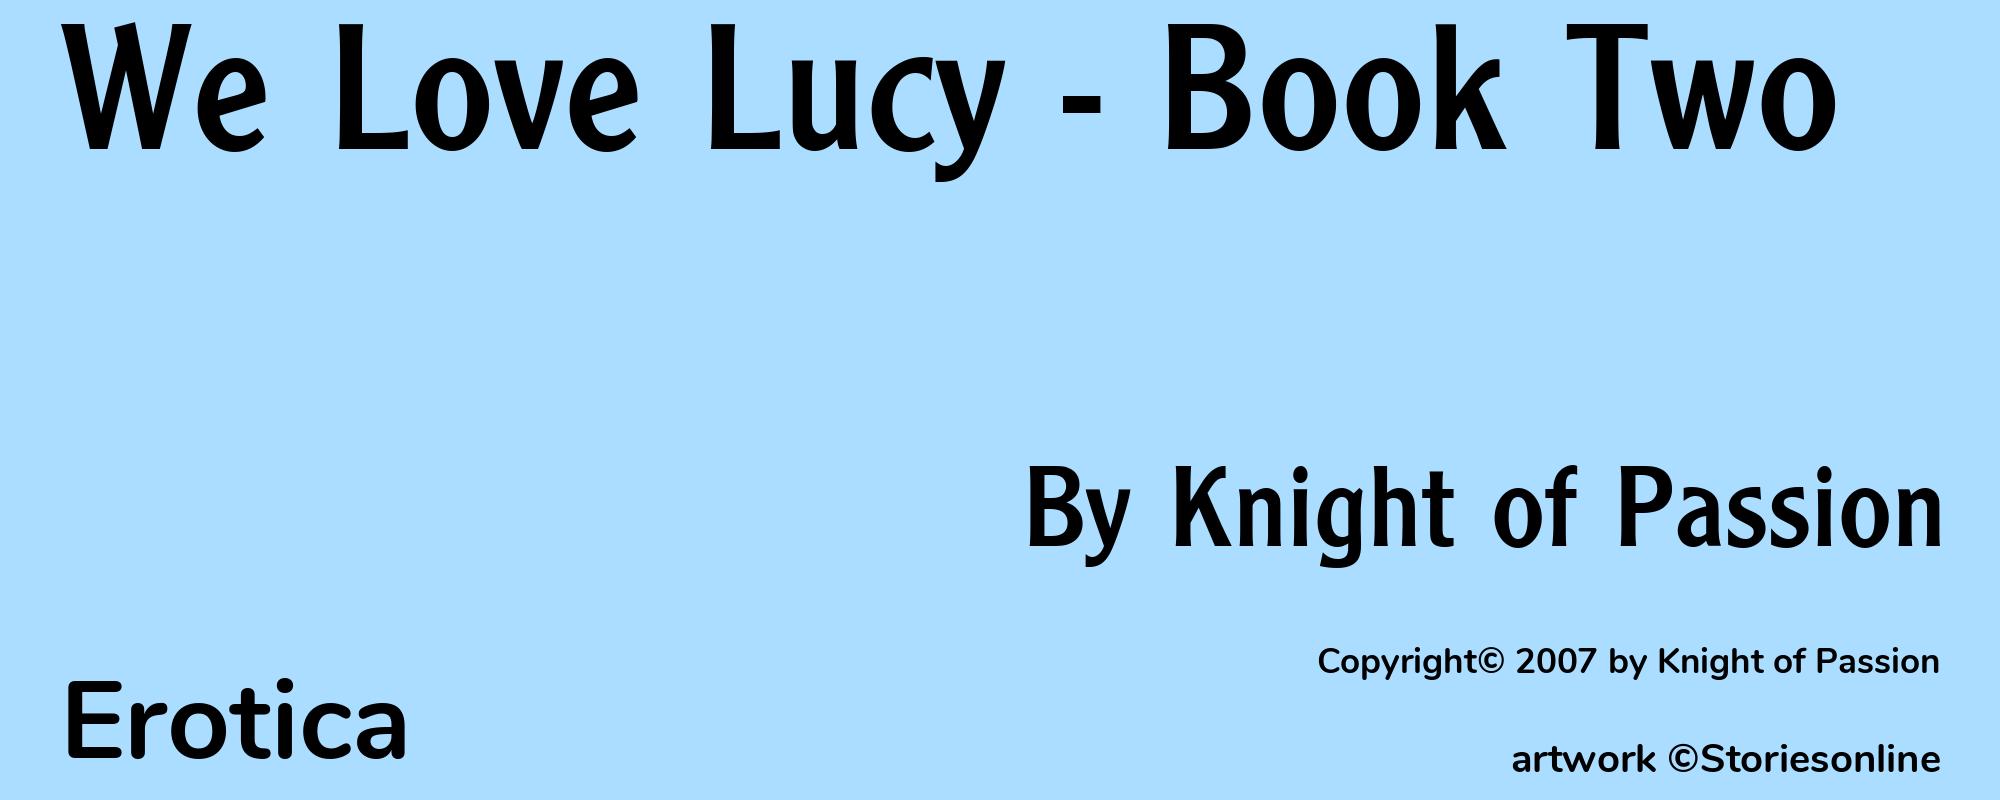 We Love Lucy - Book Two - Cover